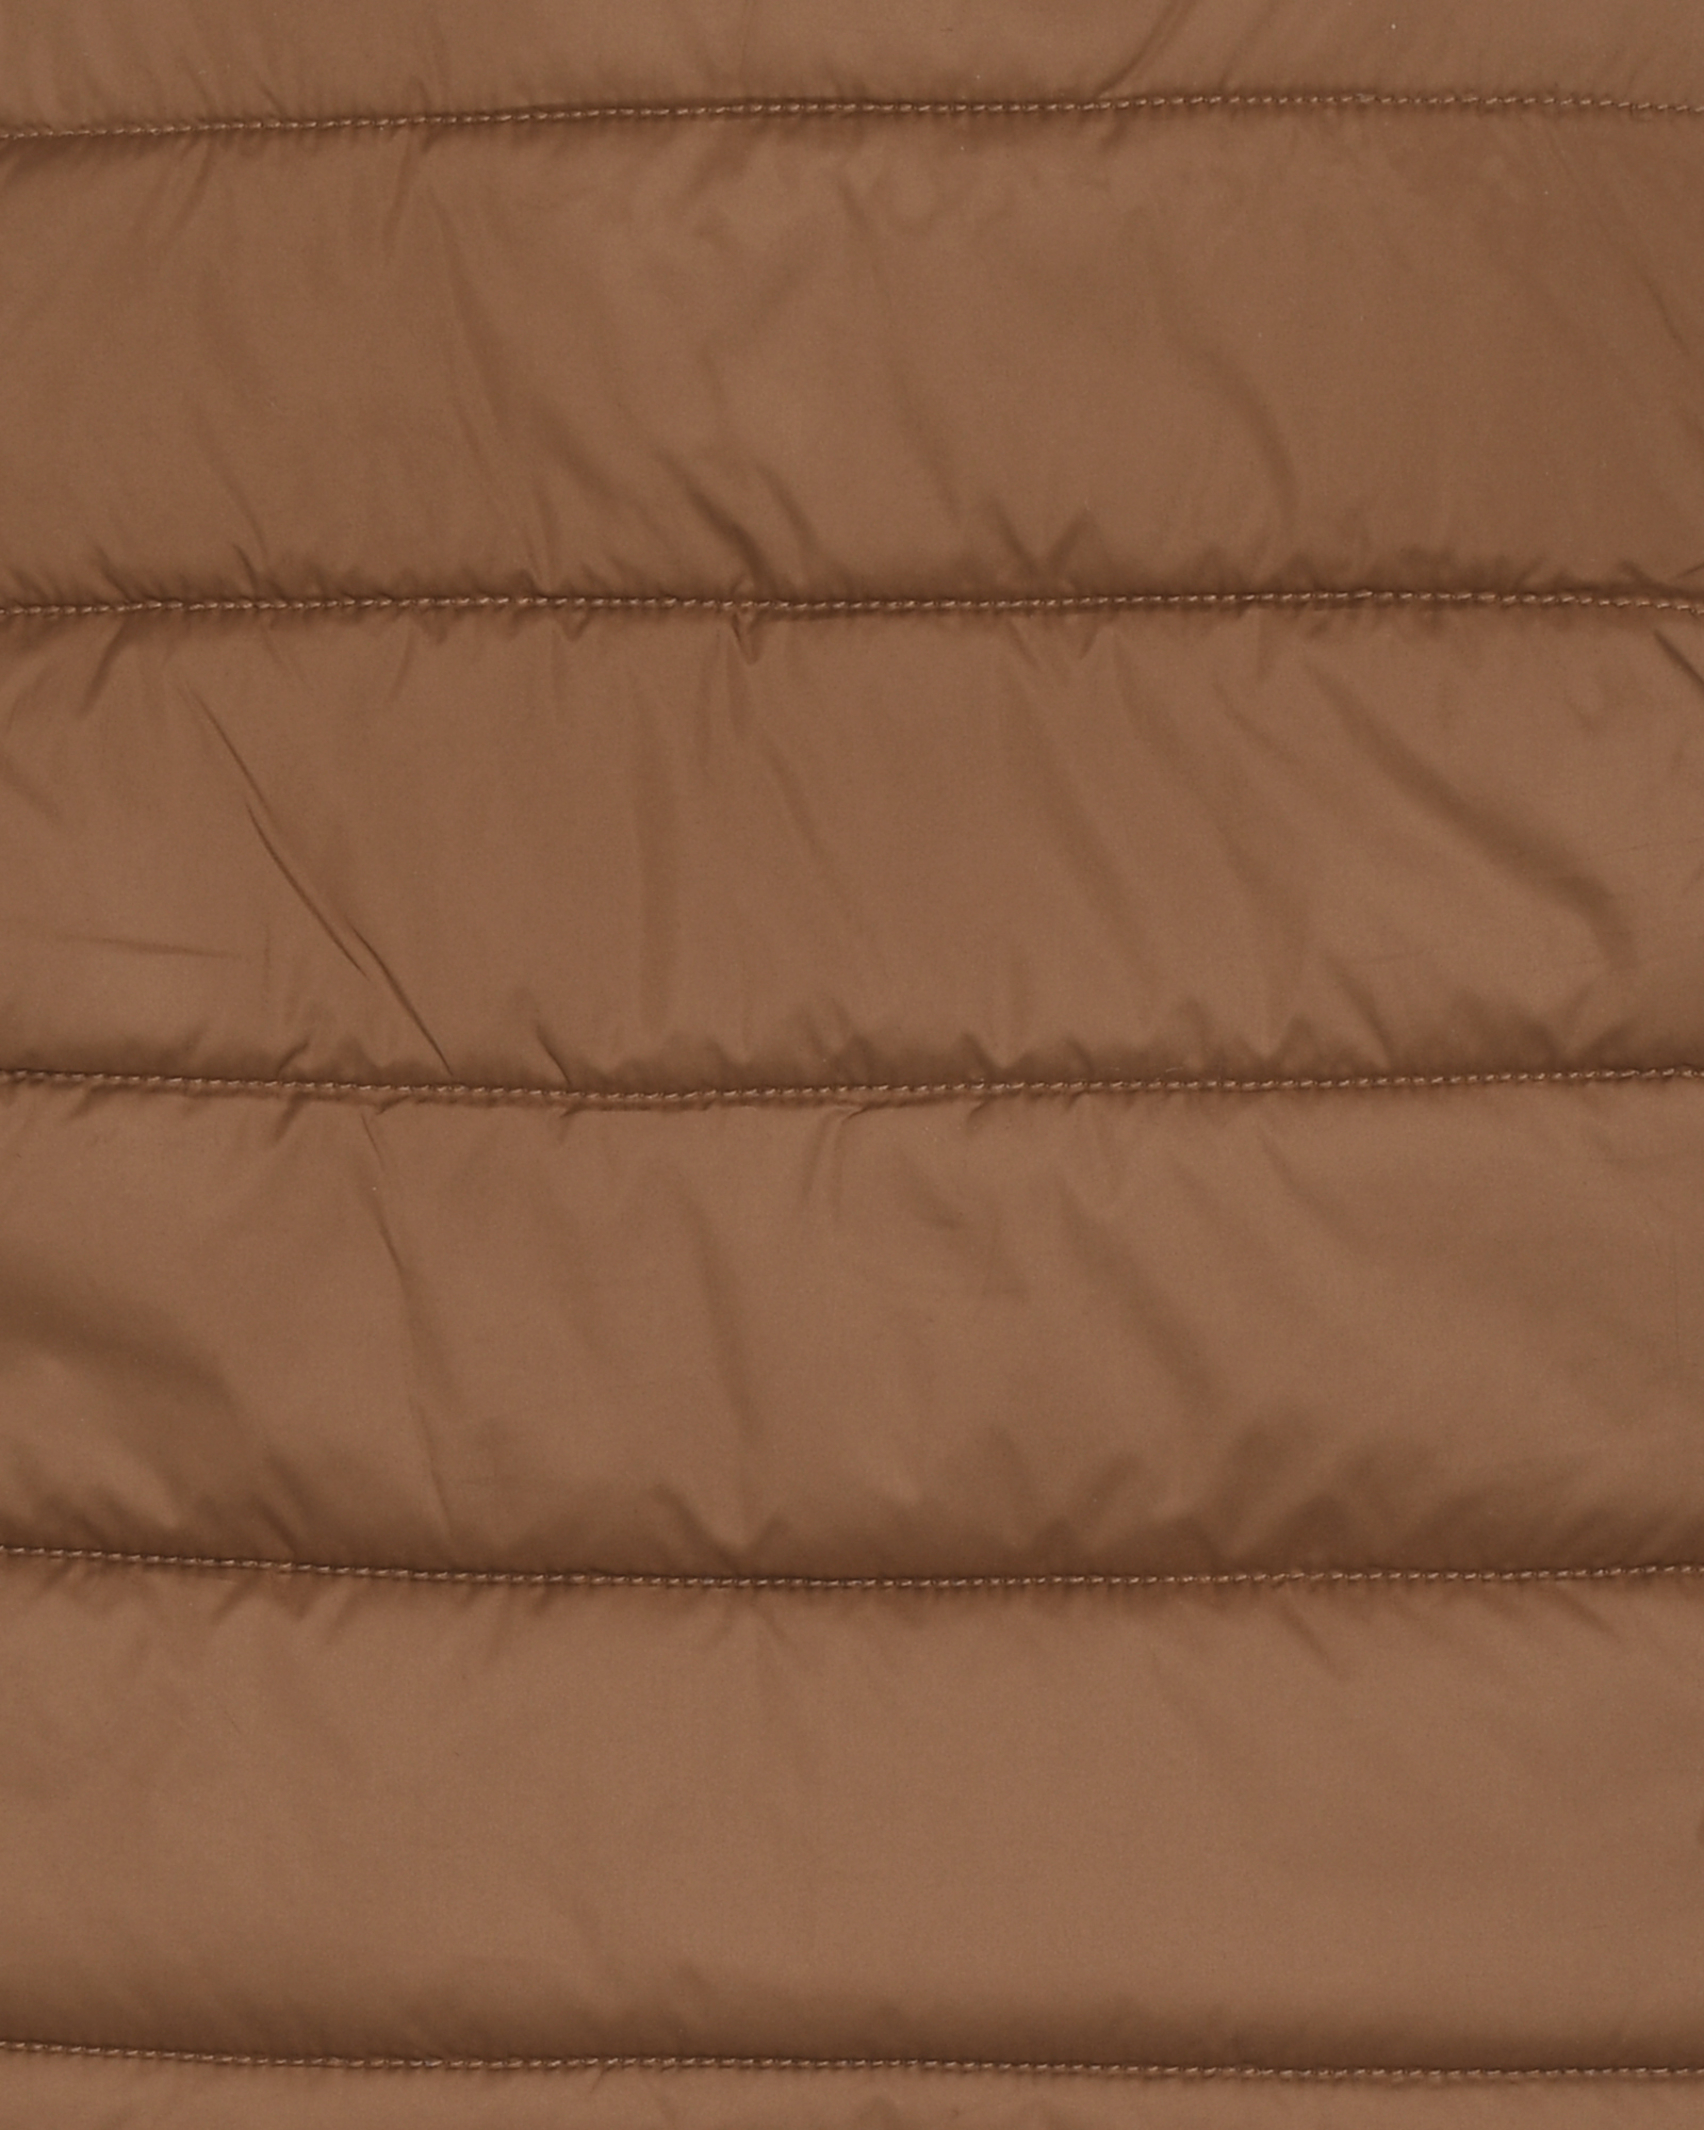 Quinn Quilted Puffer Vest in ALMOND